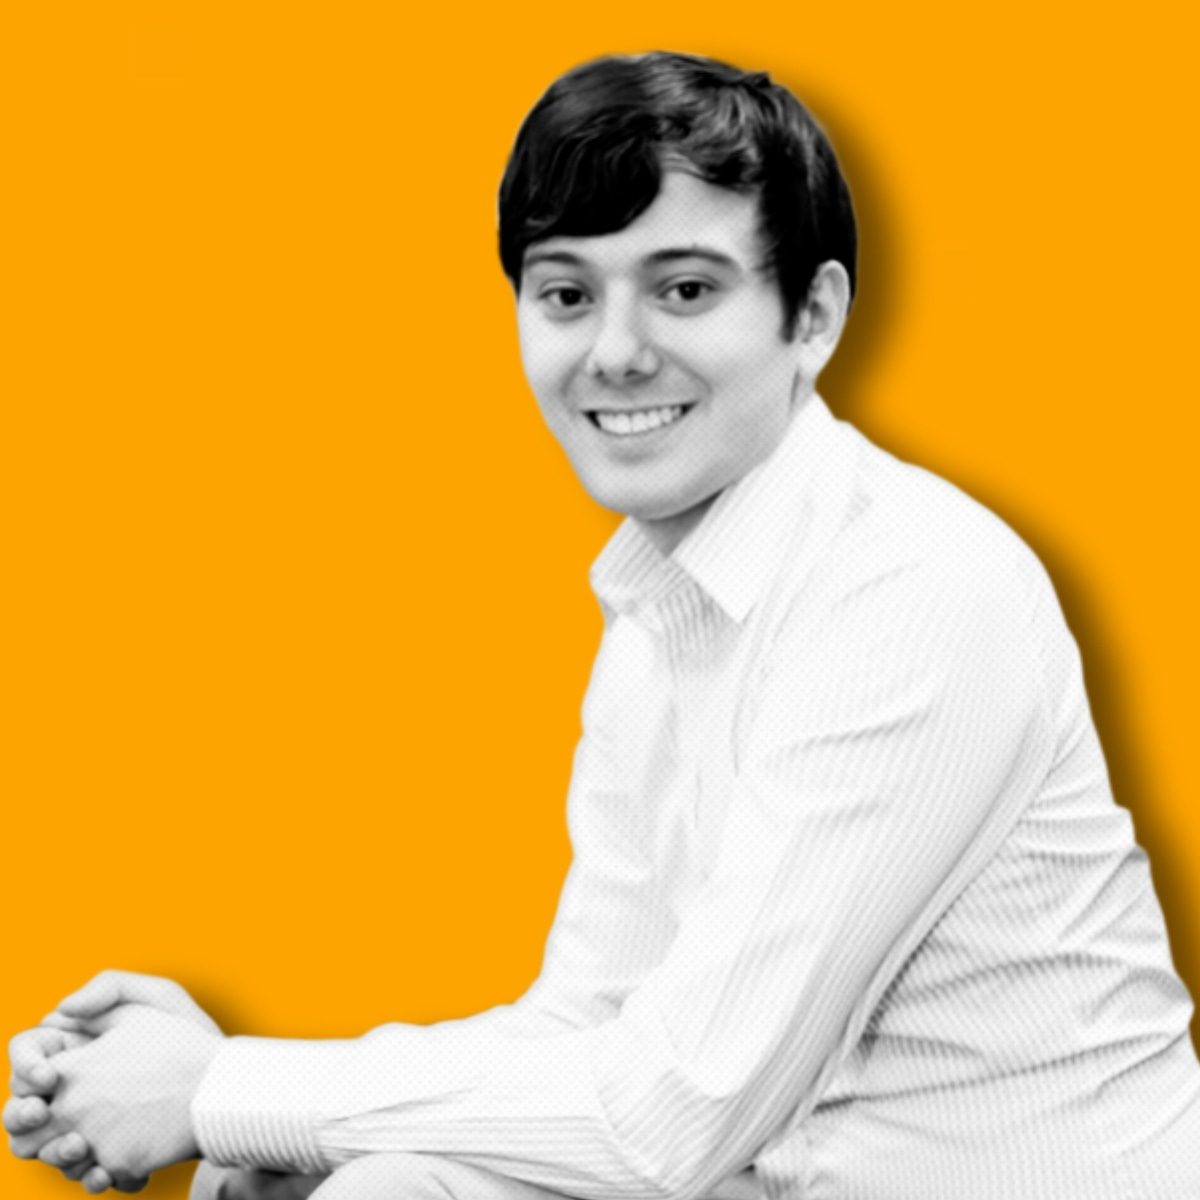 A young, and even younger-looking, short seller Martin Shkreli.